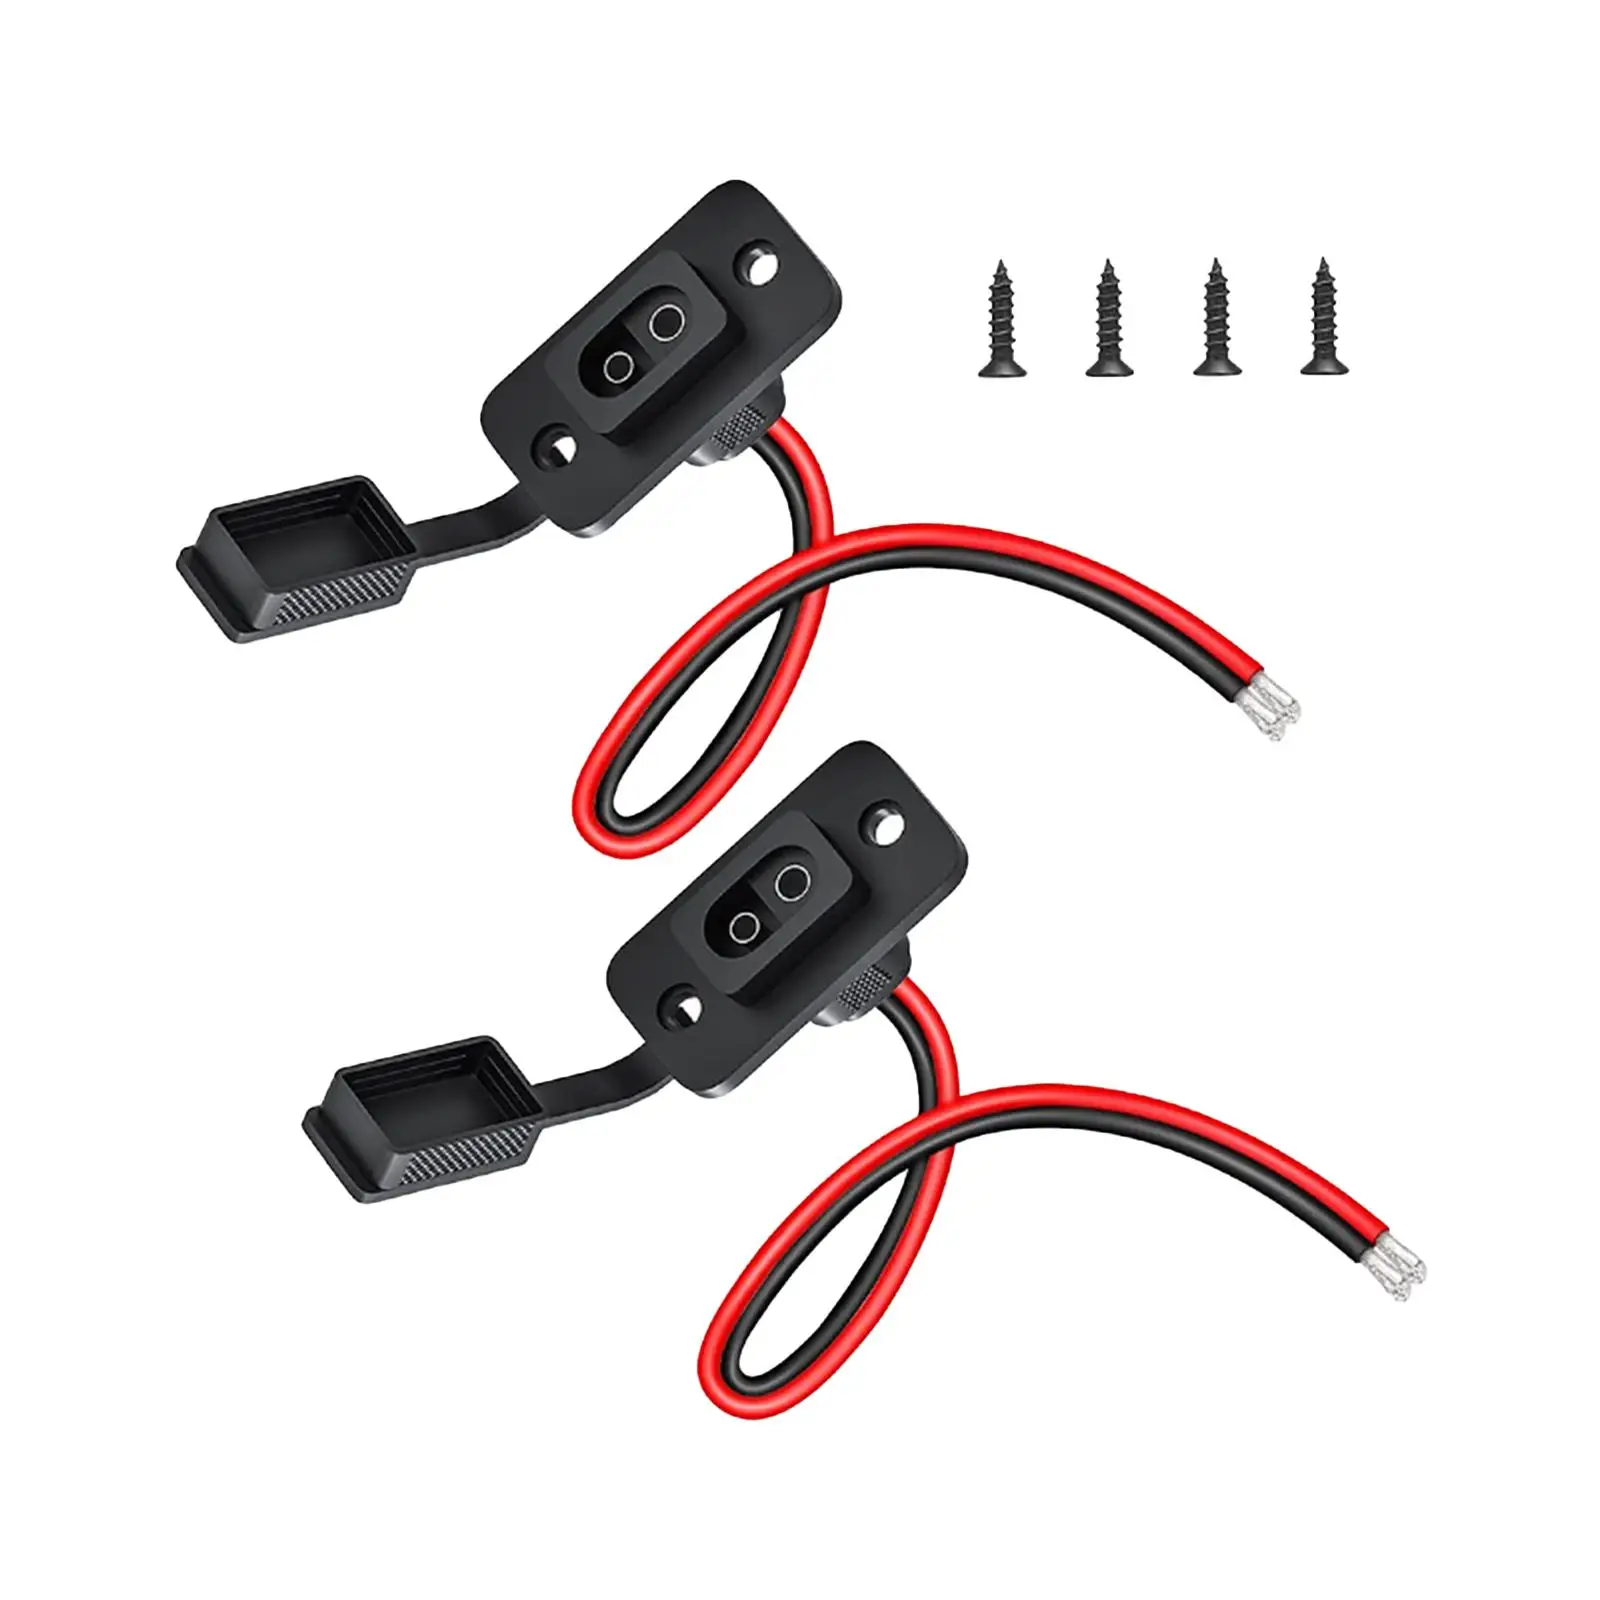 2 Pieces SAE Socket Accessories Sidewall Port Quick Connector Extension Cord